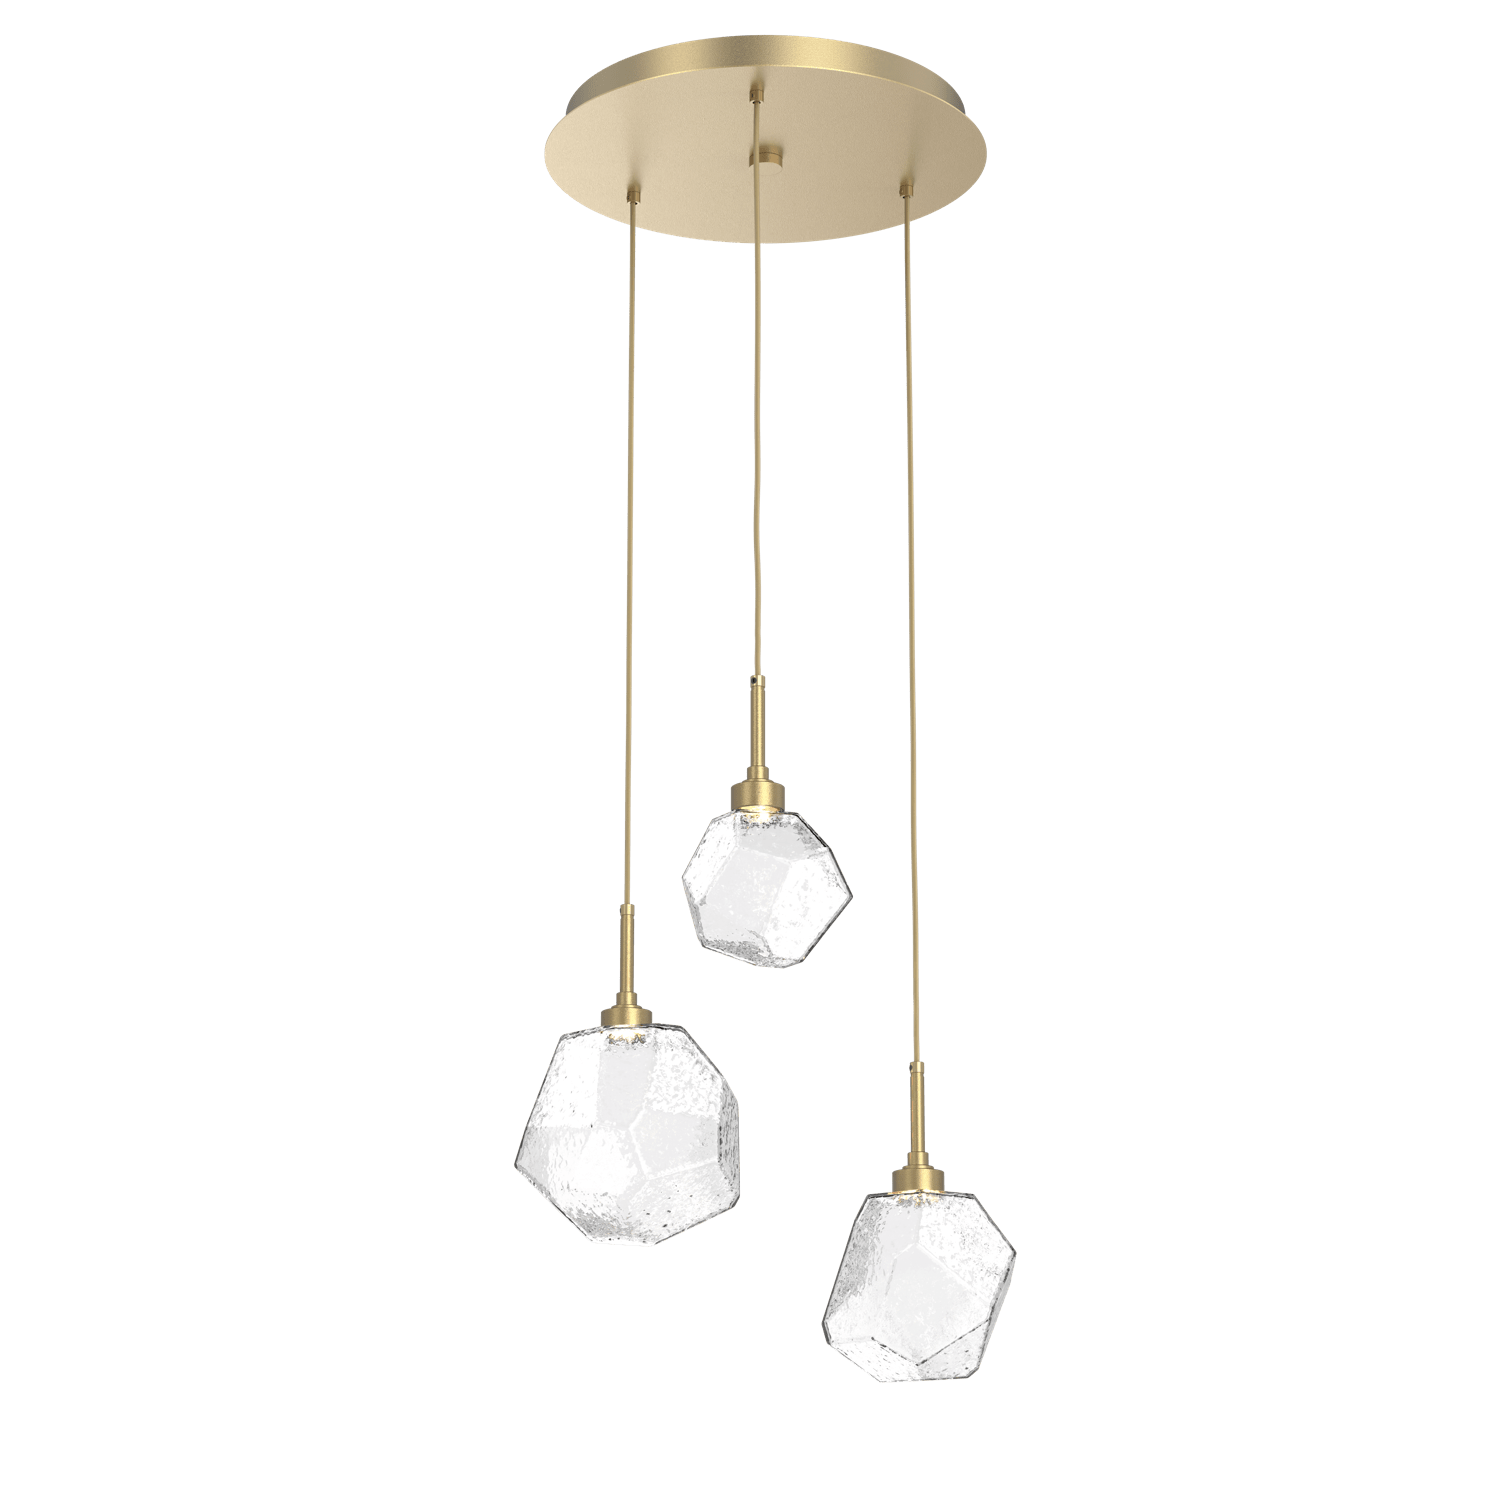 CHB0039-03-GB-C-Hammerton-Studio-Gem-3-light-round-pendant-chandelier-with-gilded-brass-finish-and-clear-blown-glass-shades-and-LED-lamping